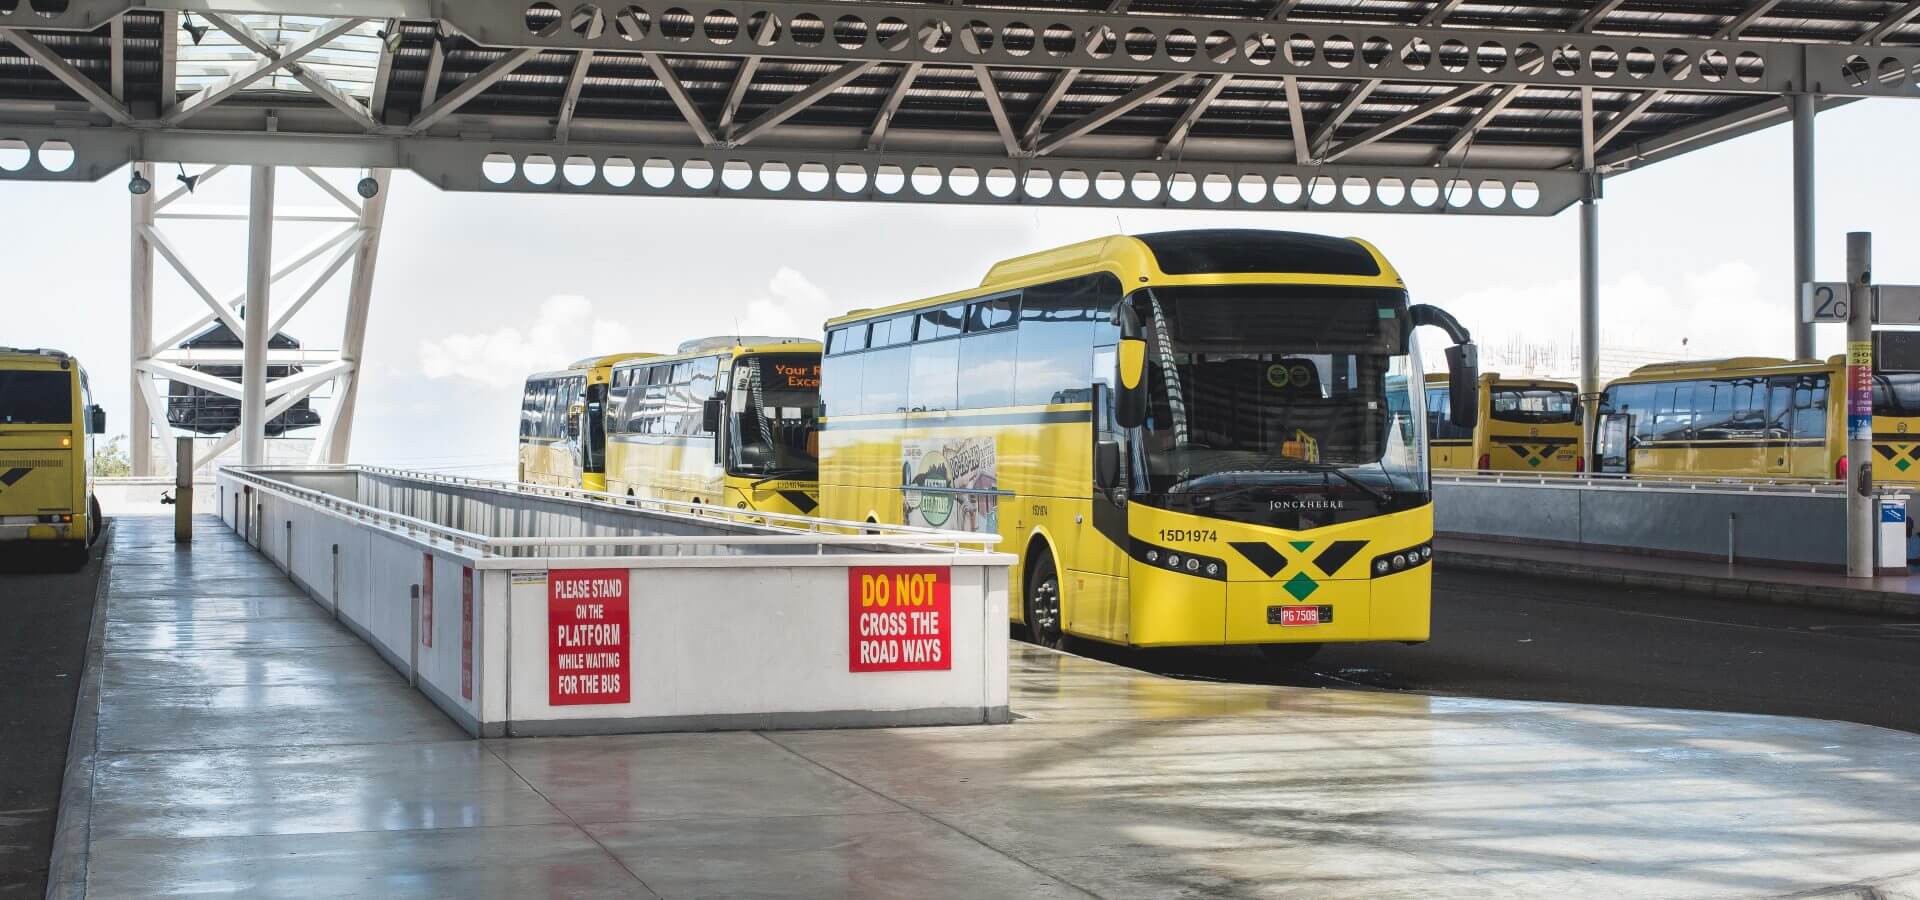 JUTC Restrooms Are Well Kept, Despite Subsidy Controversy